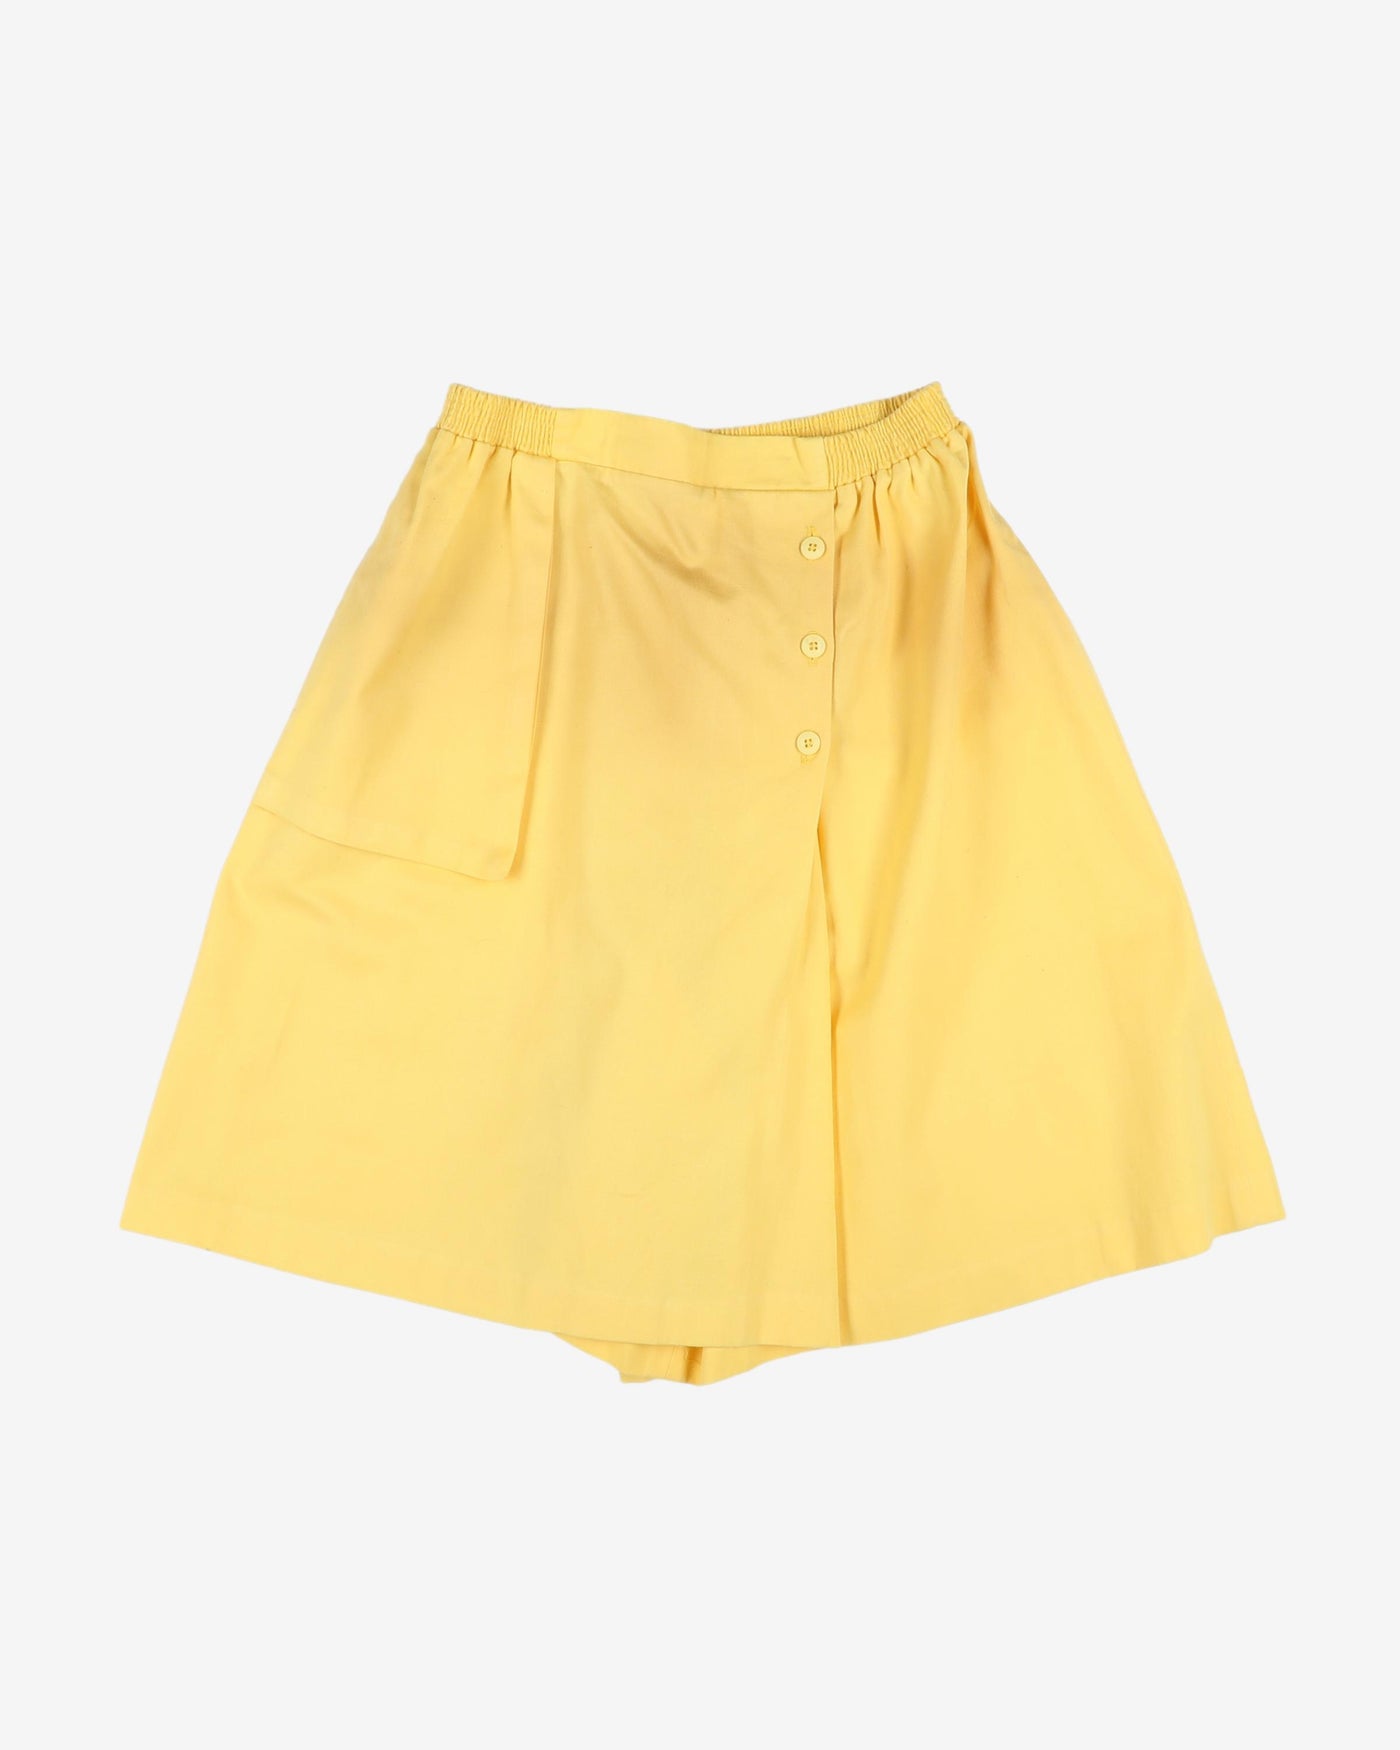 Yellow button detailed shorts - S